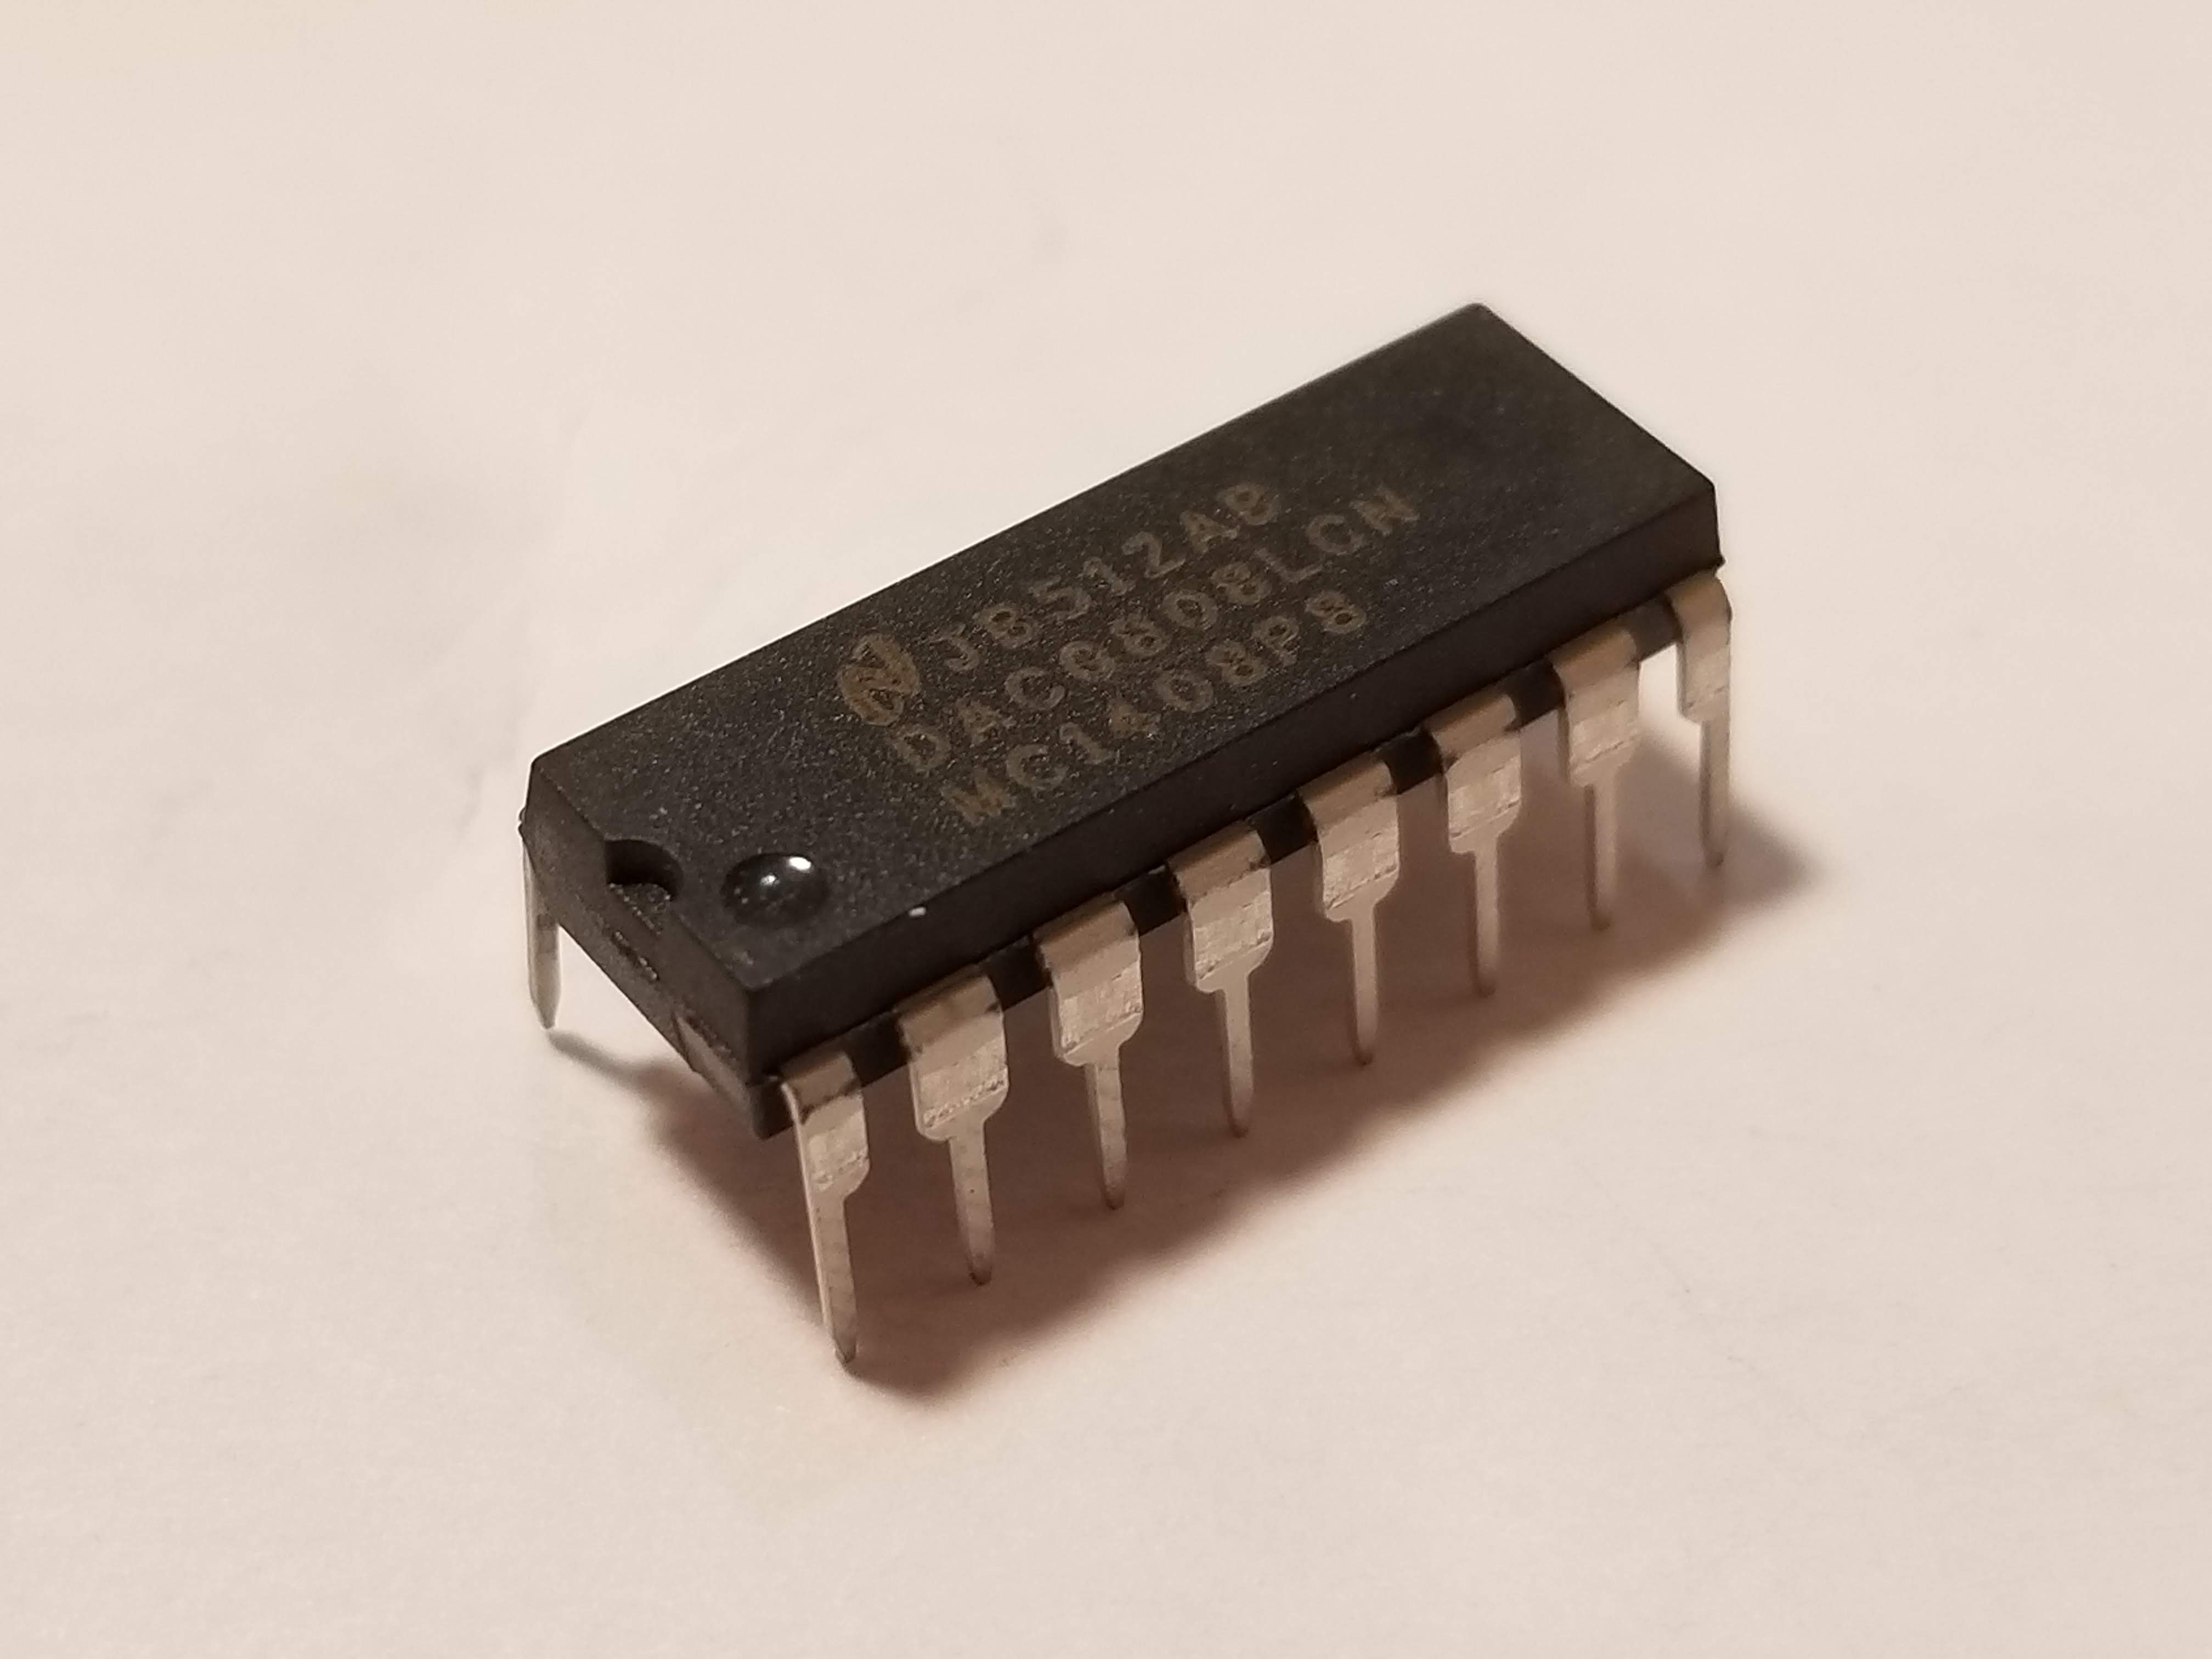 Picture of DAC0808 8-bit Parallel DAC